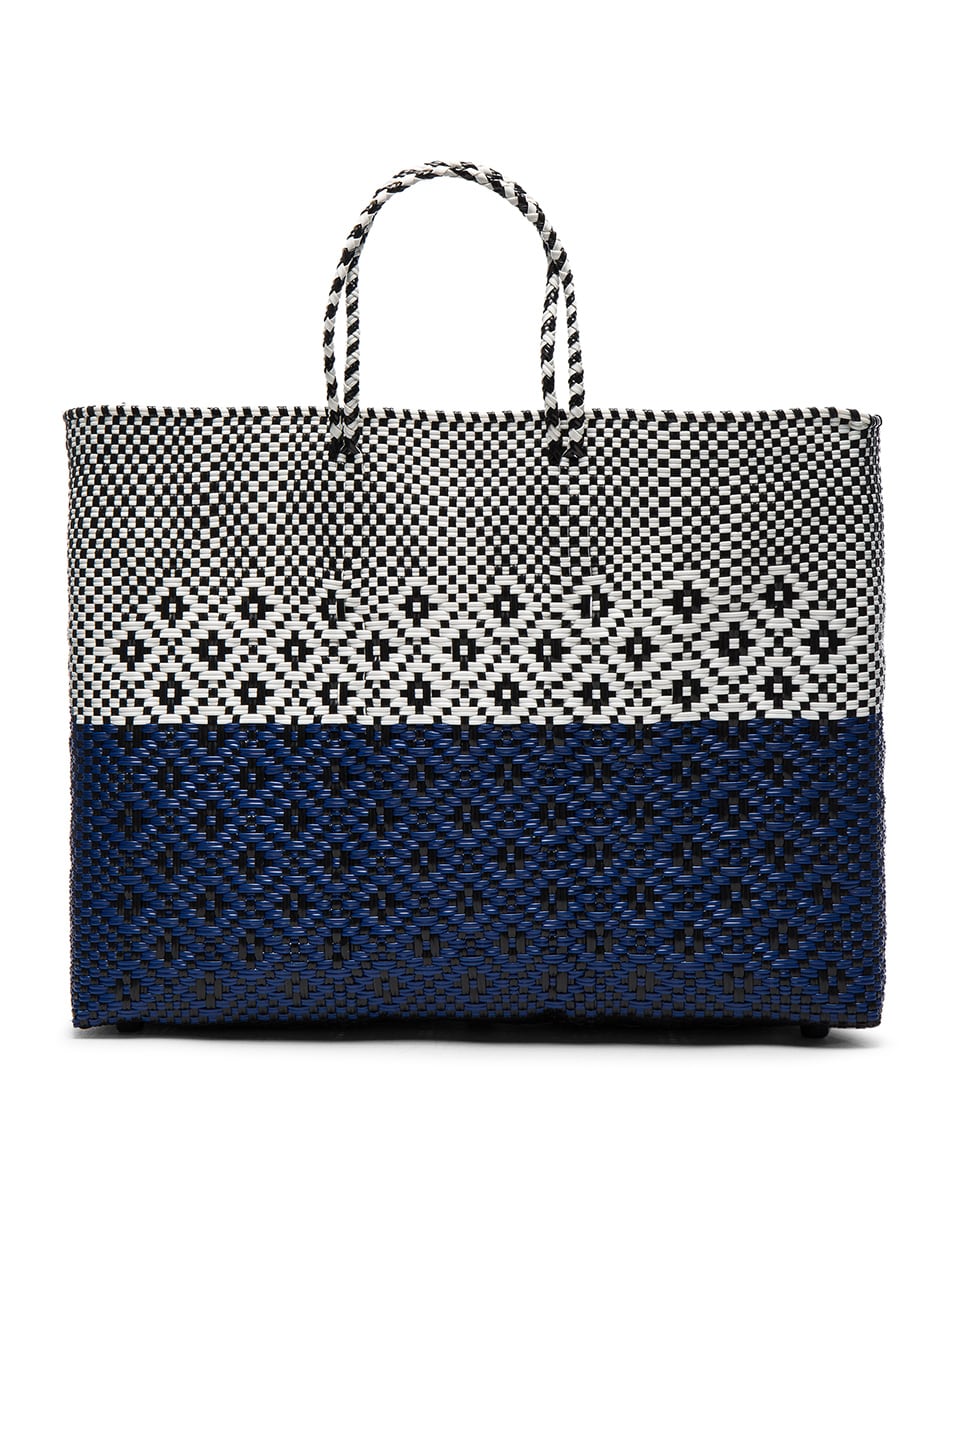 Image 1 of Truss FWRD Exclusive Large Tote in Navy & White